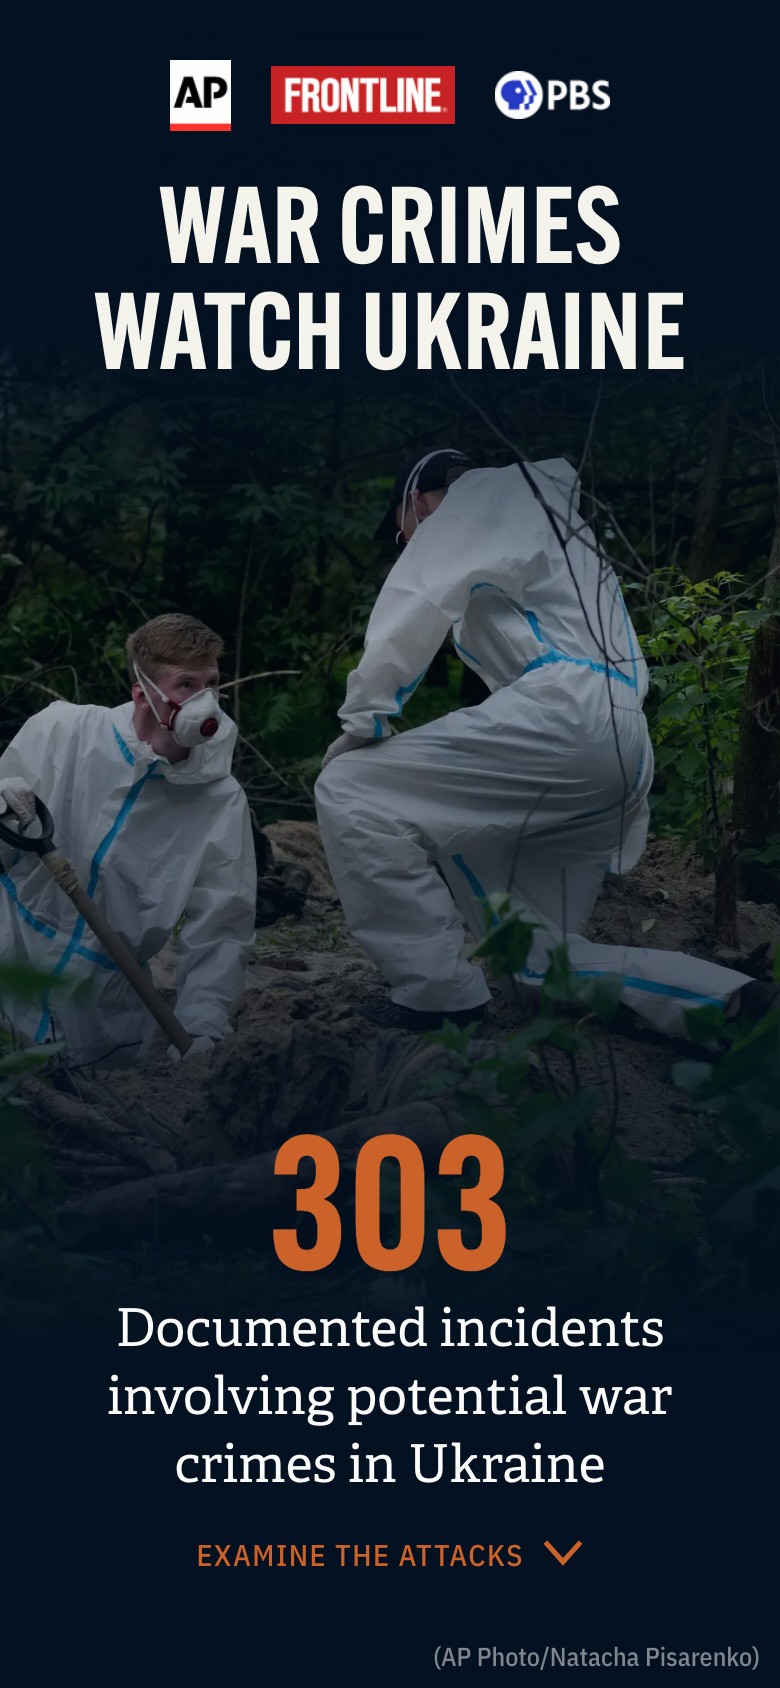 A mobile screenshot of a web application about potential war crimes in Ukraine showing an image of two men examining a mass grave site. Text at the bottom displays the current number of potential war crimes documented in Ukraine: 303.